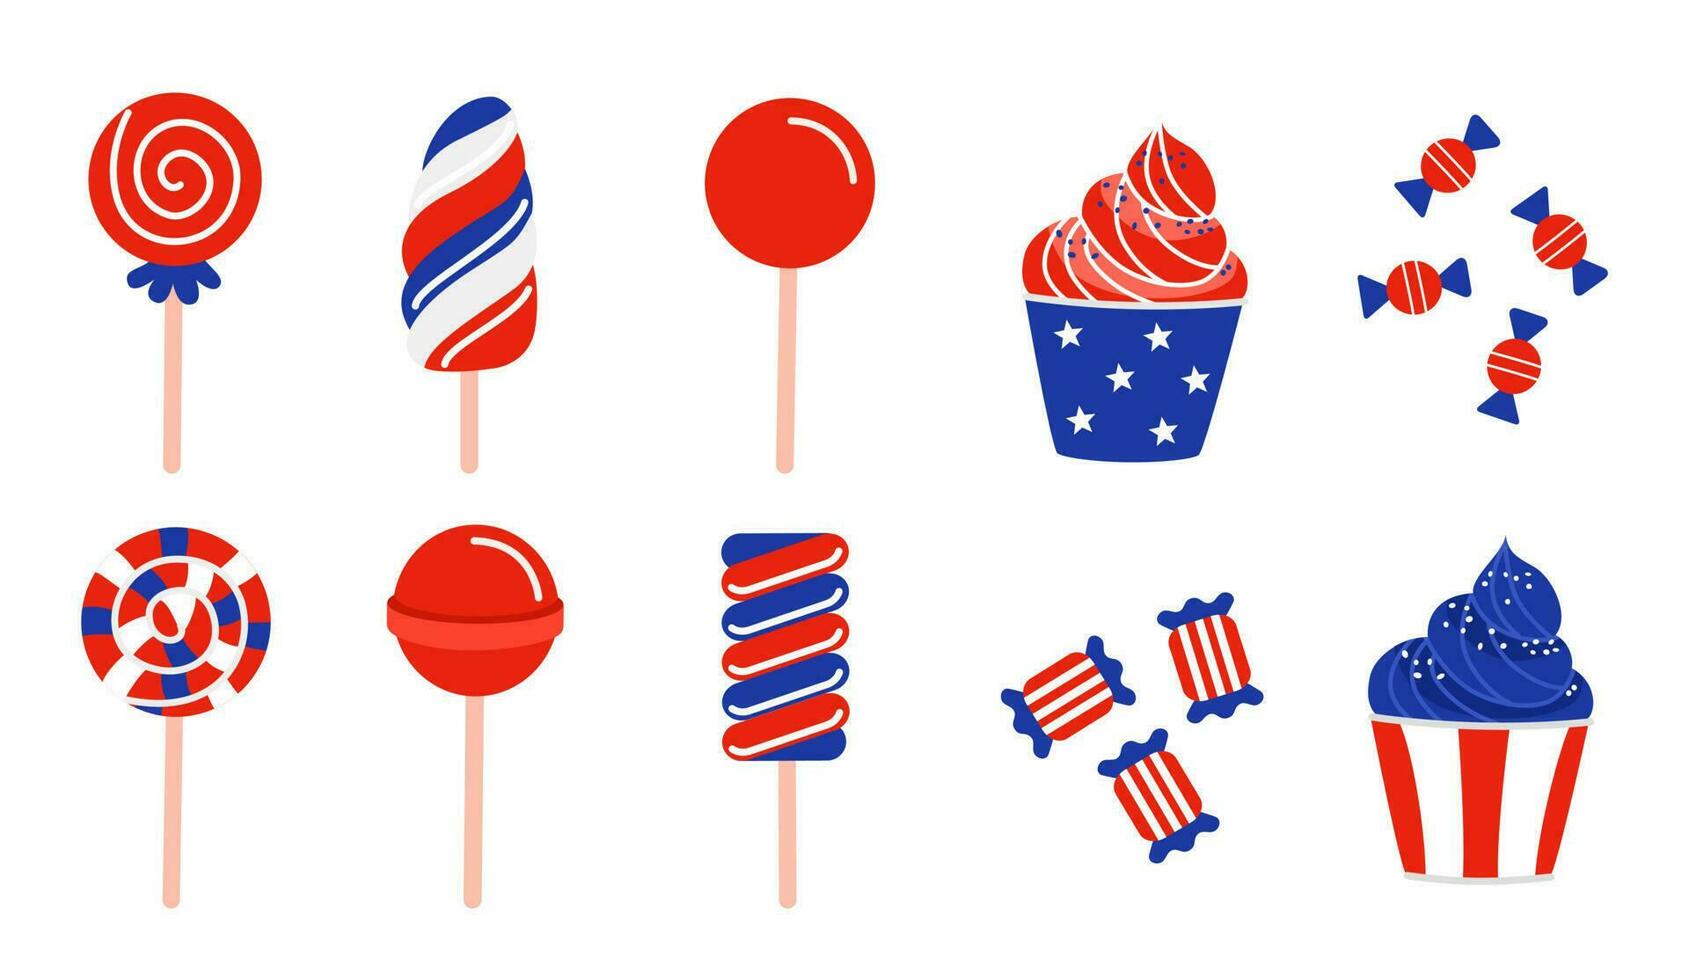 Illustration of a set of lollipops, sweets, and cupcakes in red, white, and blue in a flat style. Sweets for USA Independence Day. Vector illustration